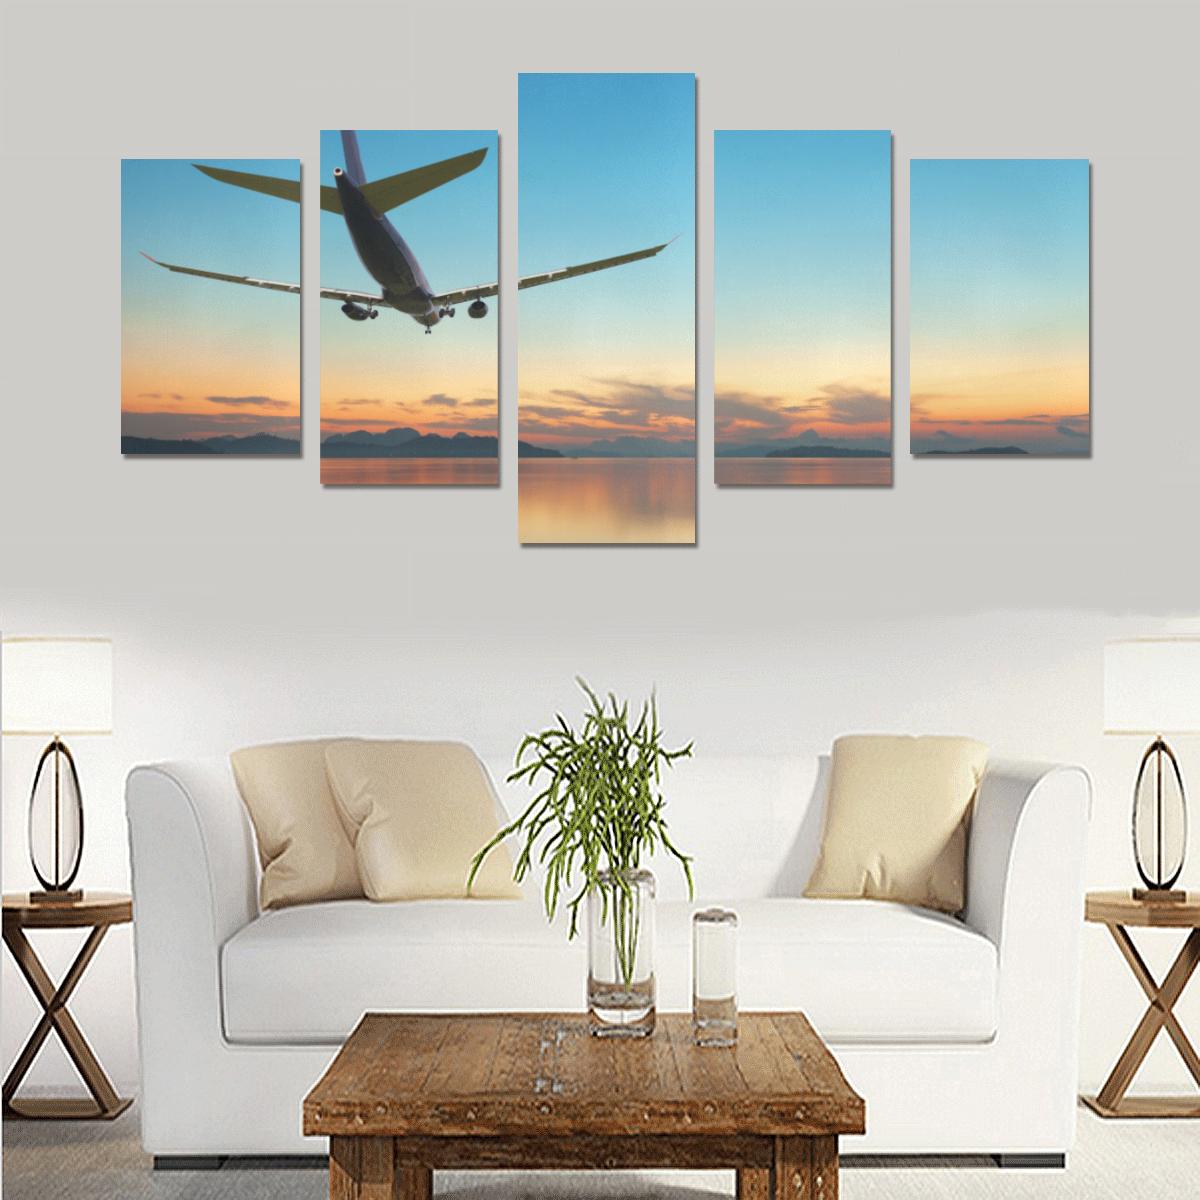 AIRPLANE FLYING OVER TROPICAL SEAIRBUS AT BEAUTIFUL SUN CANVAS PRINT SETS C (NO FRAME) THE AV8R